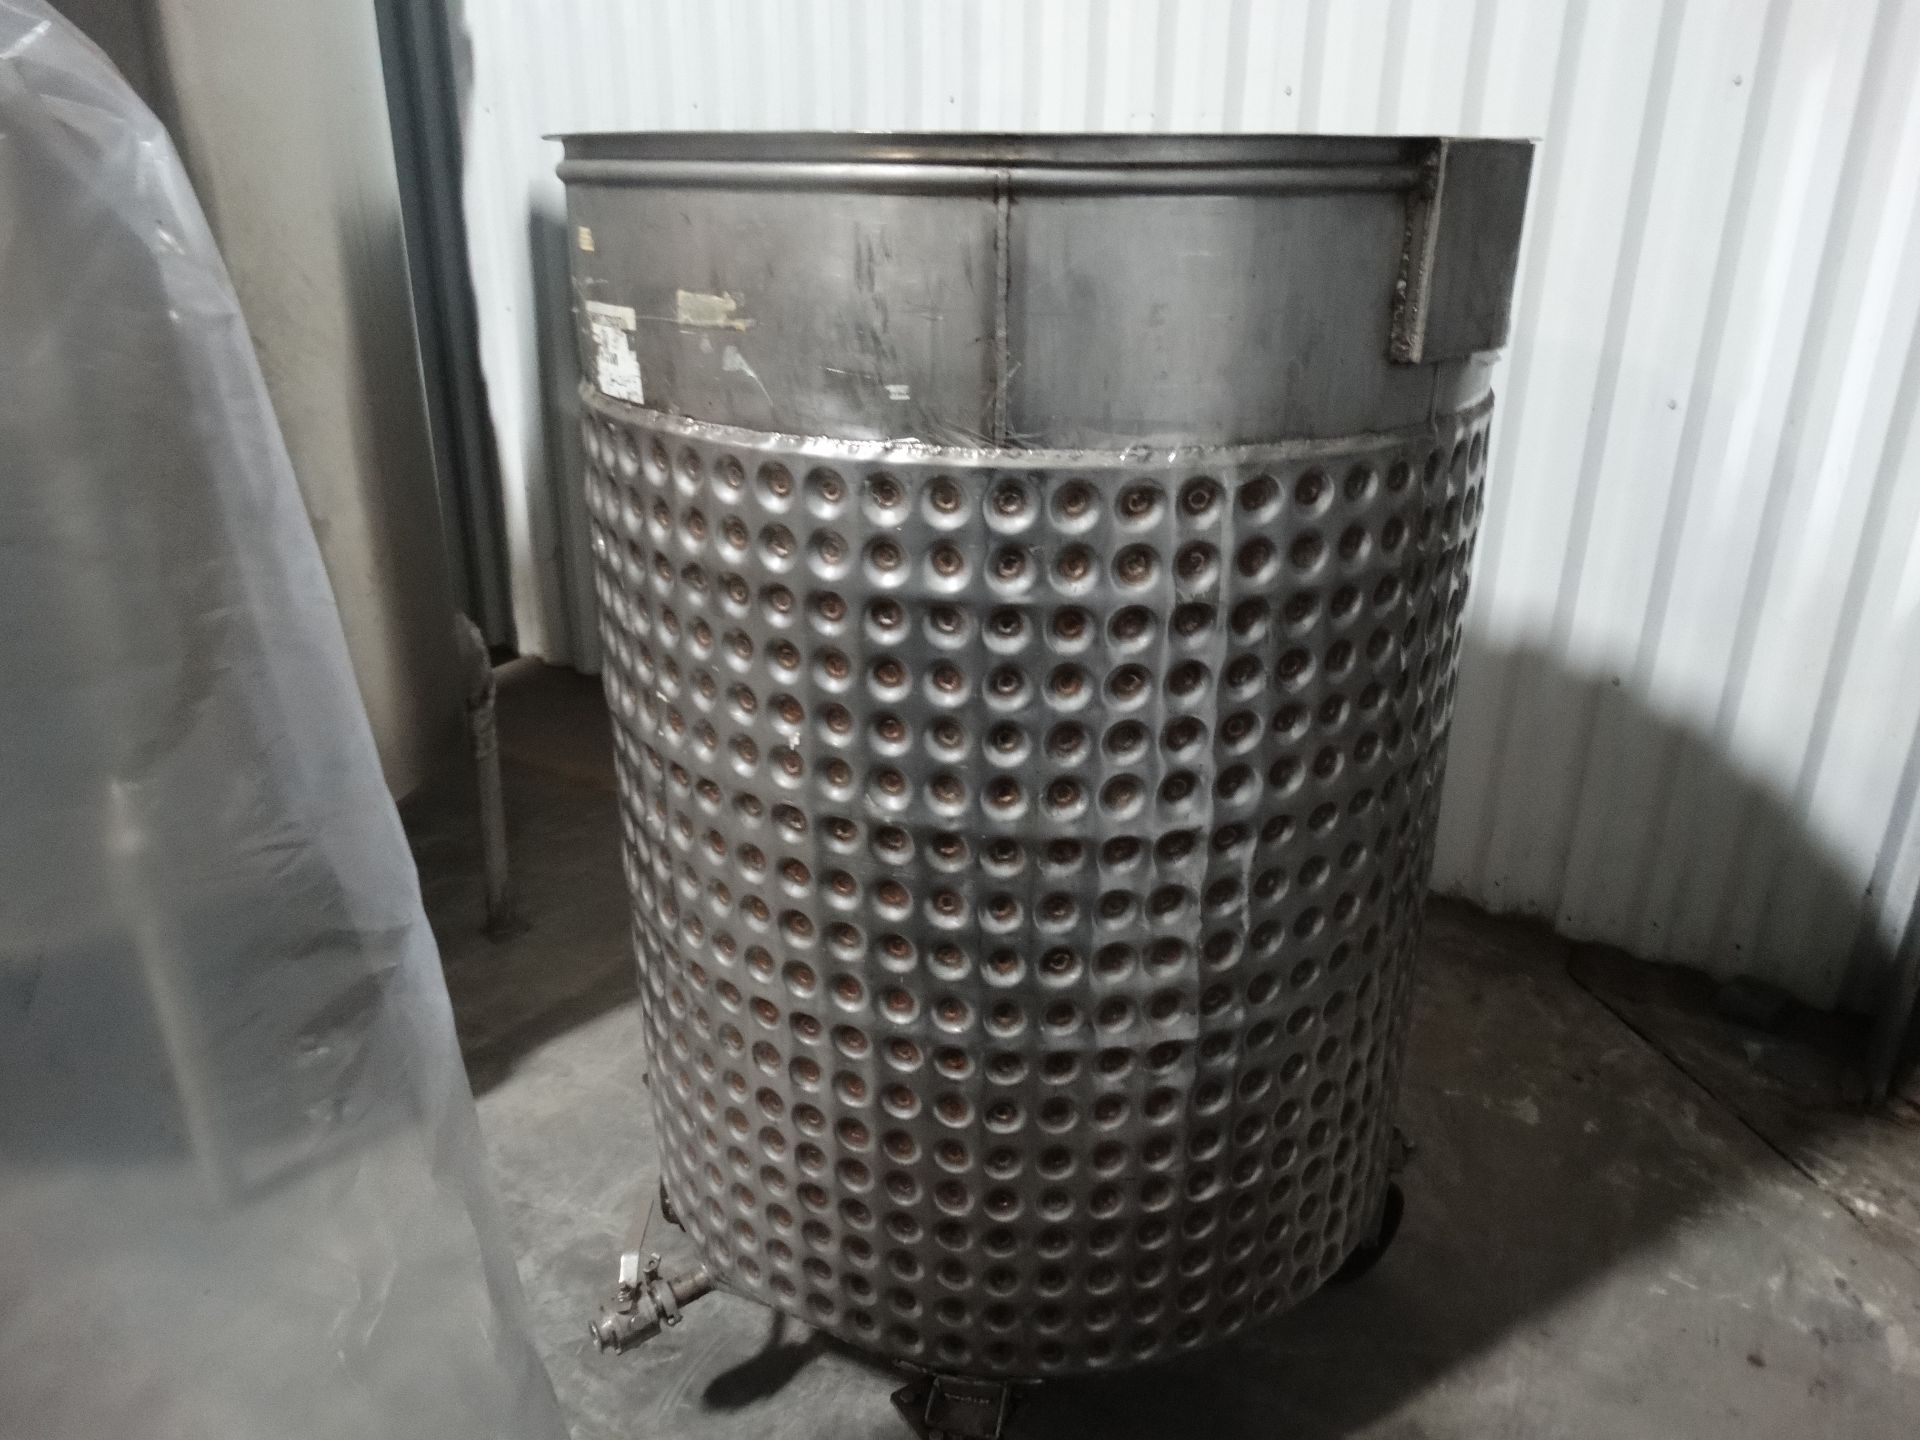 1400 Liter Stainless Steel Dimple Jacketed Tank H6650 - Image 4 of 6